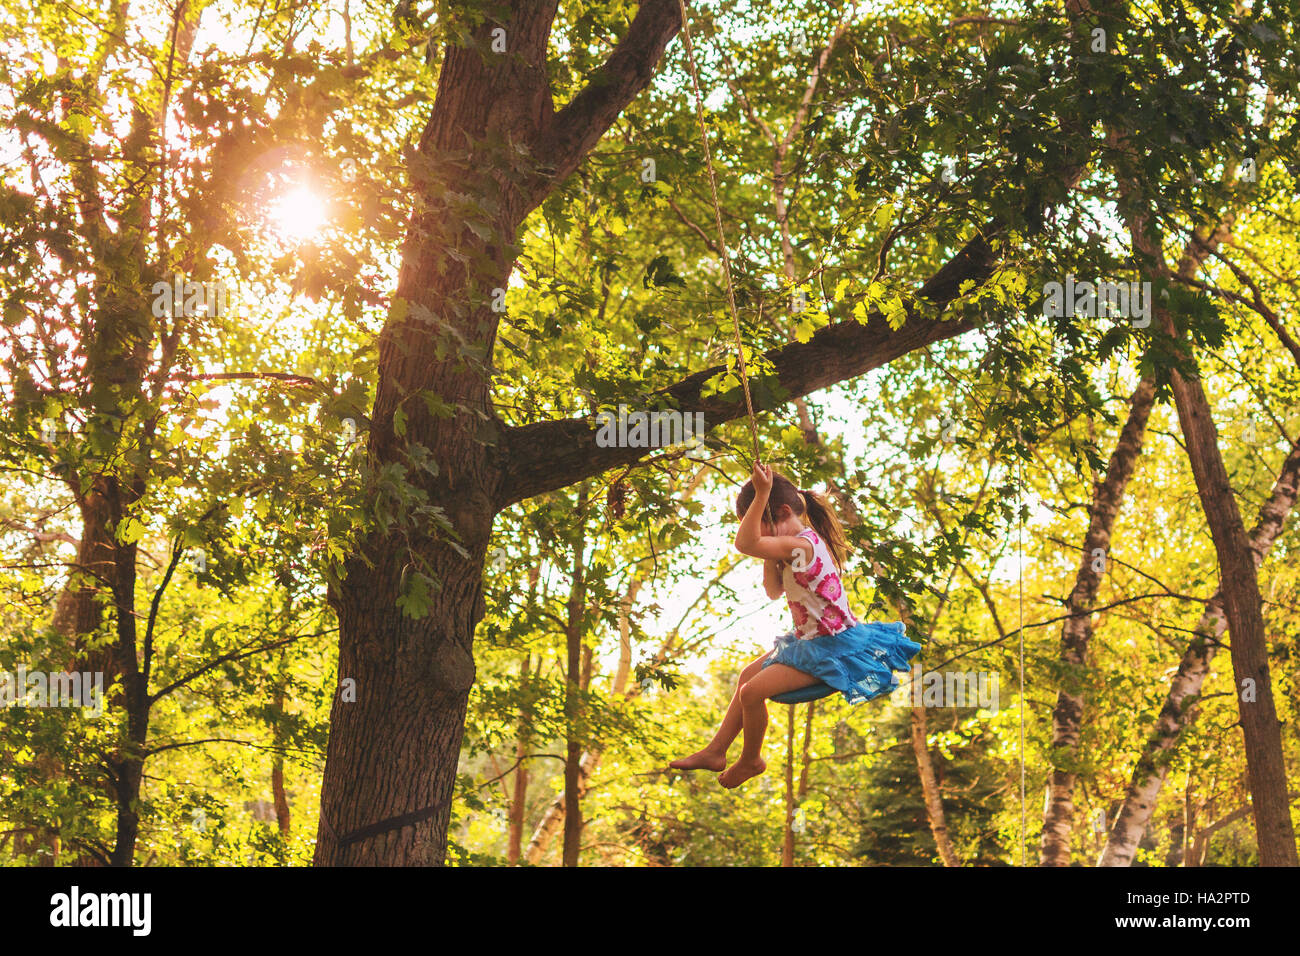 Girl swinging on a rope swing Stock Photo